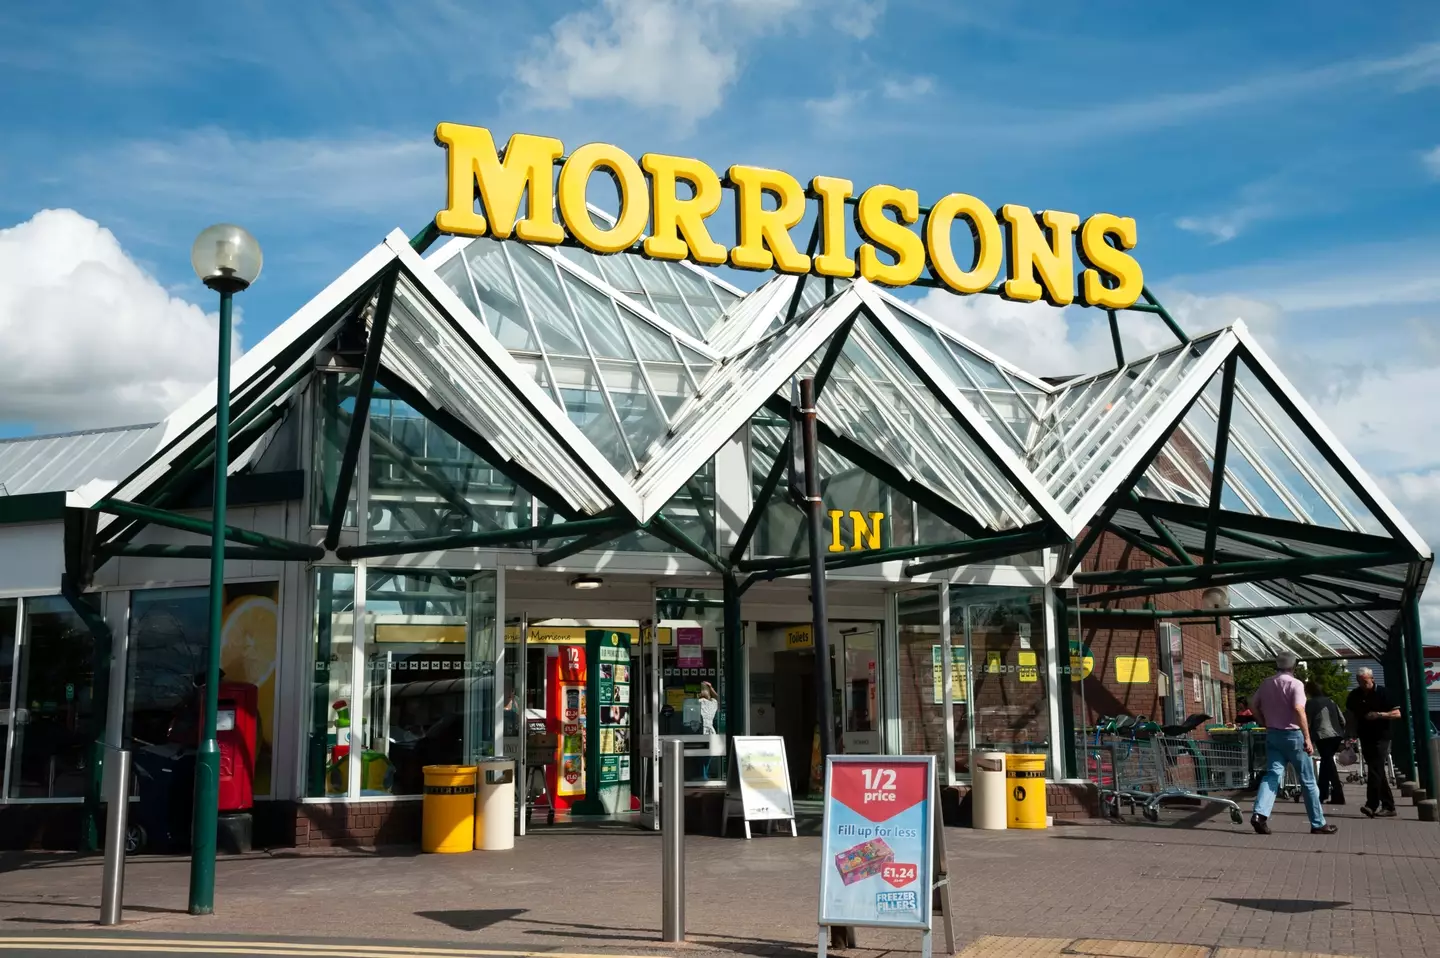 Morrisons is doing its bit to help out and make sure that no one will go hungry this half term.